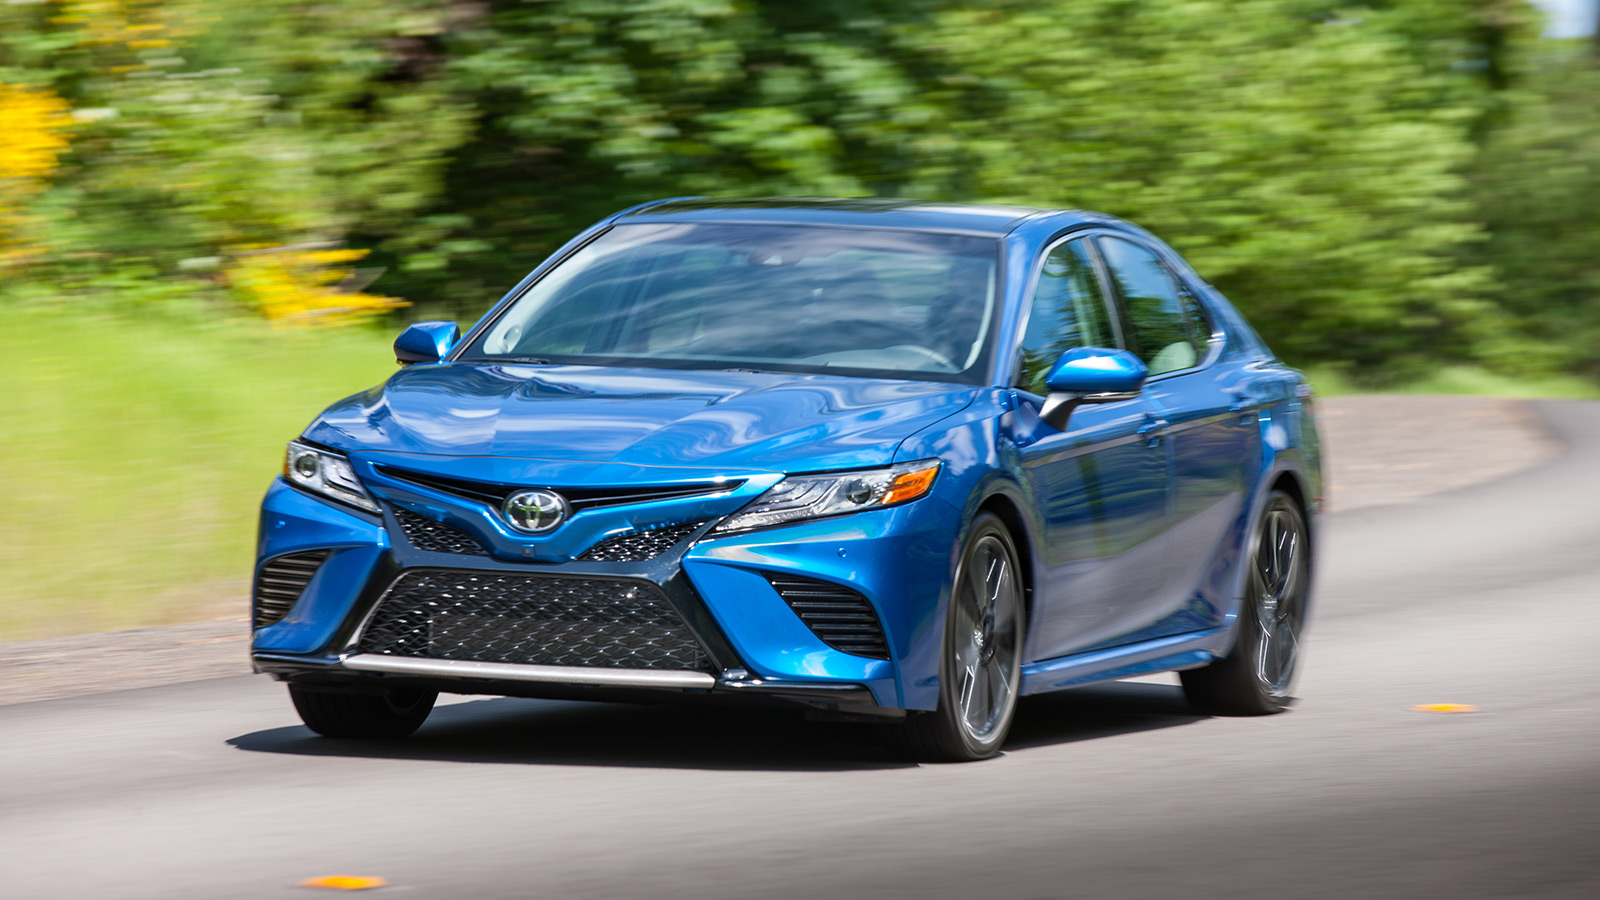 What are the Best Tires for a Toyota Camry?